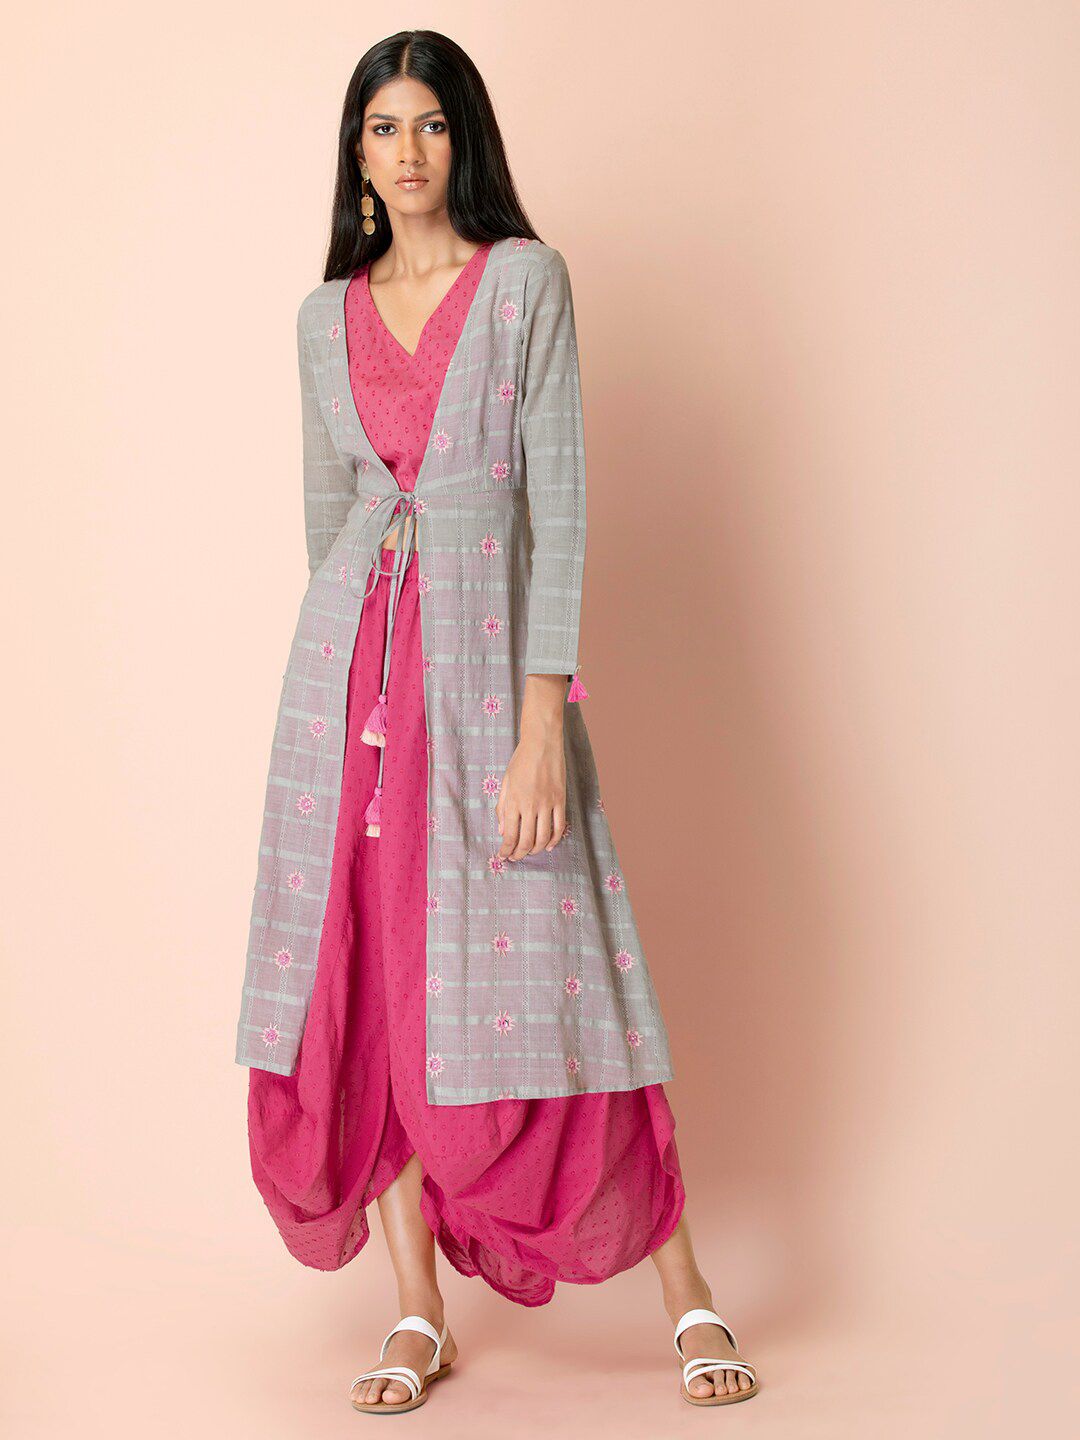 INDYA Women Grey & Pink Cotton Embroidered Jacket Price in India